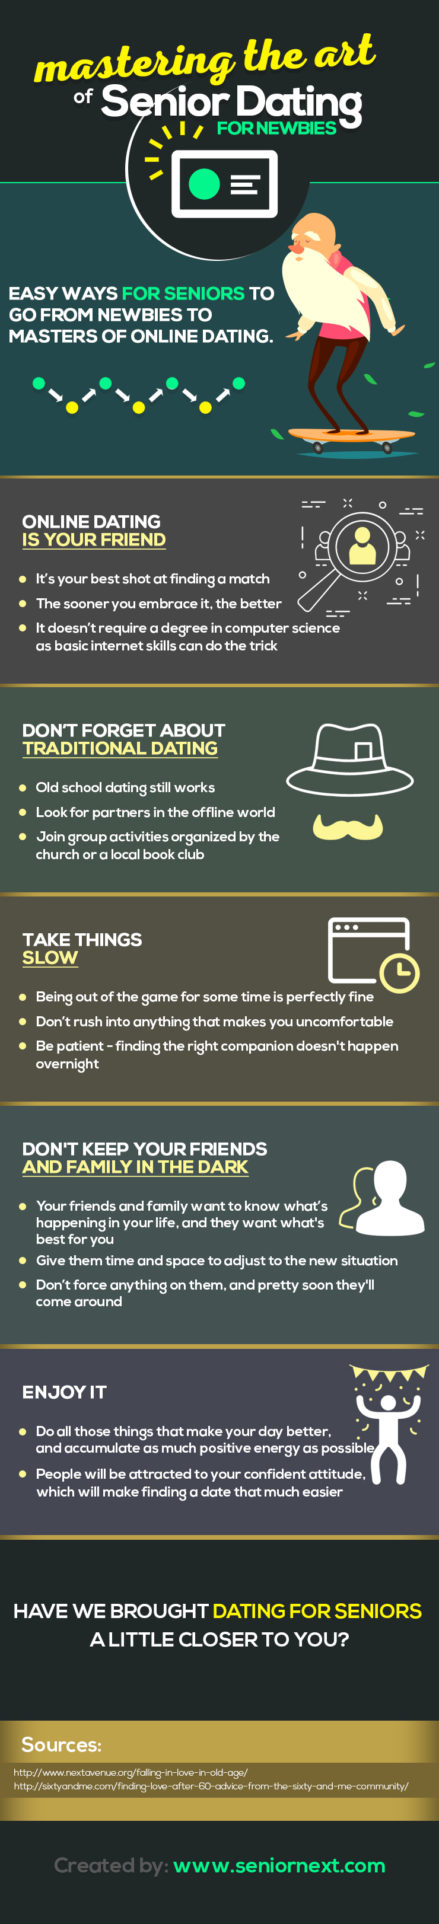 Mastering the Art of Senior Dating for Newbies